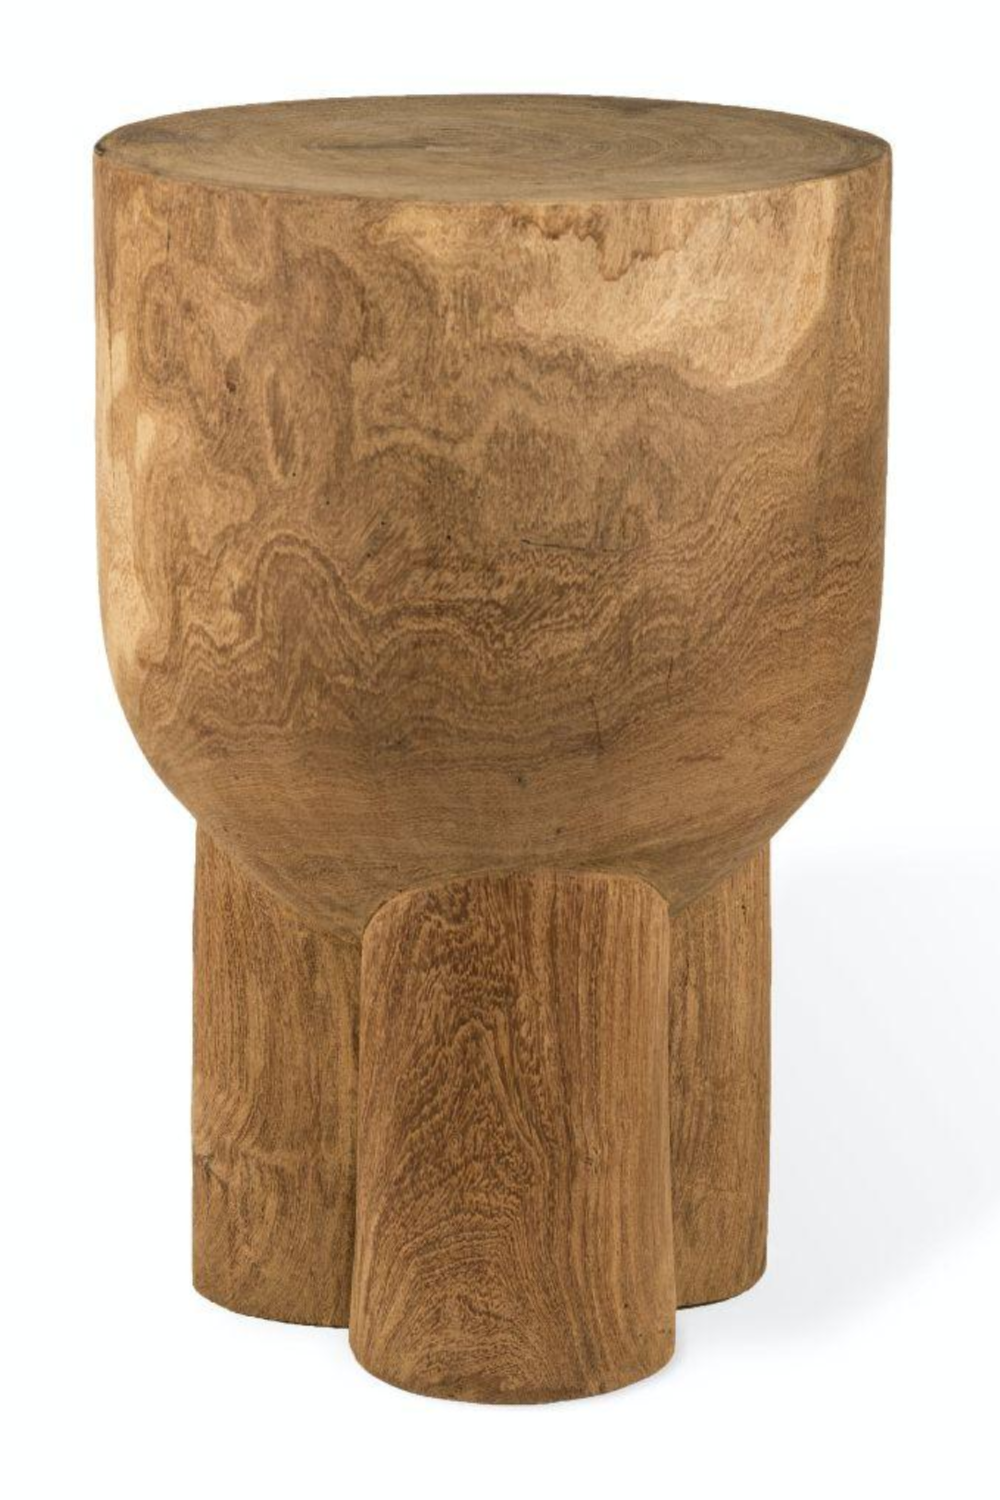 Handcrafted Wooden Stool | Pols Potten Pile | OROA.com